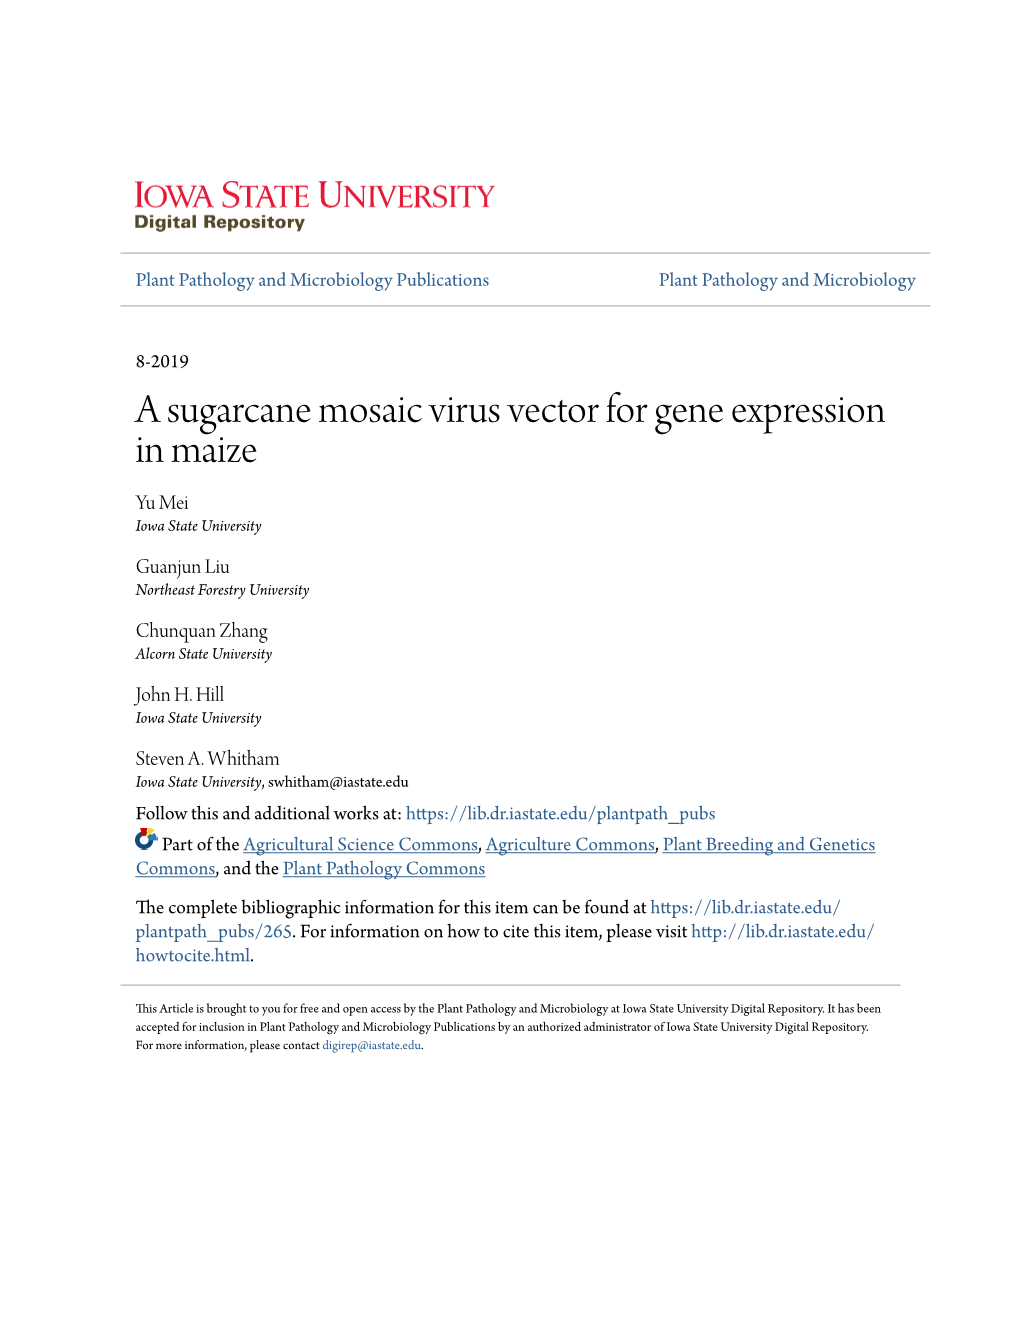 A Sugarcane Mosaic Virus Vector for Gene Expression in Maize Yu Mei Iowa State University